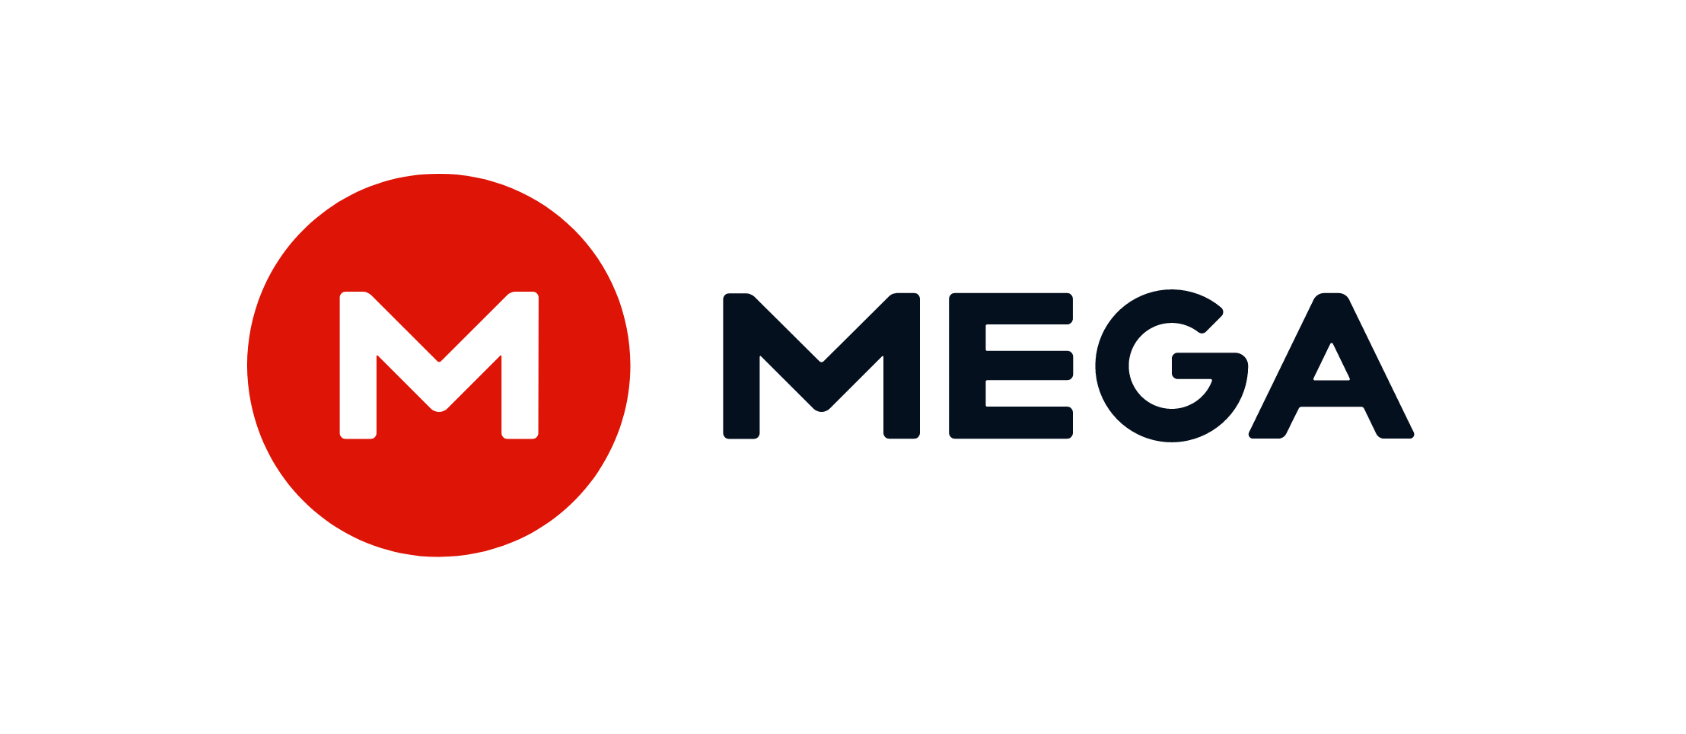 Is mega safe to download from